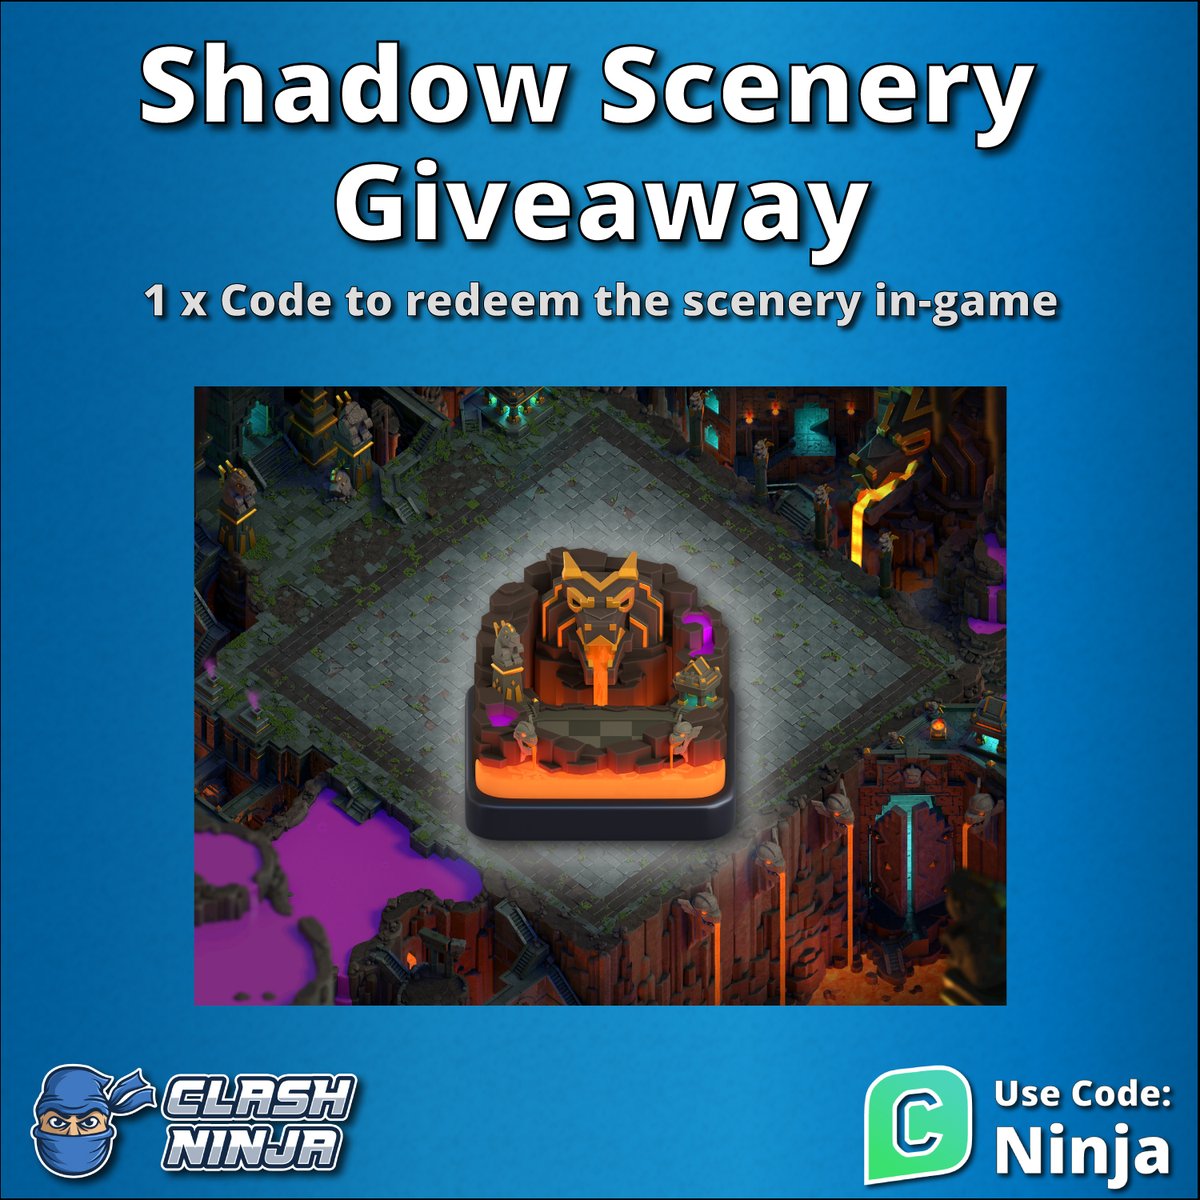 Shadow Scenery Giveaway!

1 x Shadow Scenery code

This time I'll pick 2 winners, each receiving 1 code each.

To Enter:
✅Follow @ClashDotNinja
✅Retweet this tweet

Optional:
Subscribe to youtube.com/c/clashninja

Winner announced after 12:00 UTC 17th May 2024

#ClashofClans…